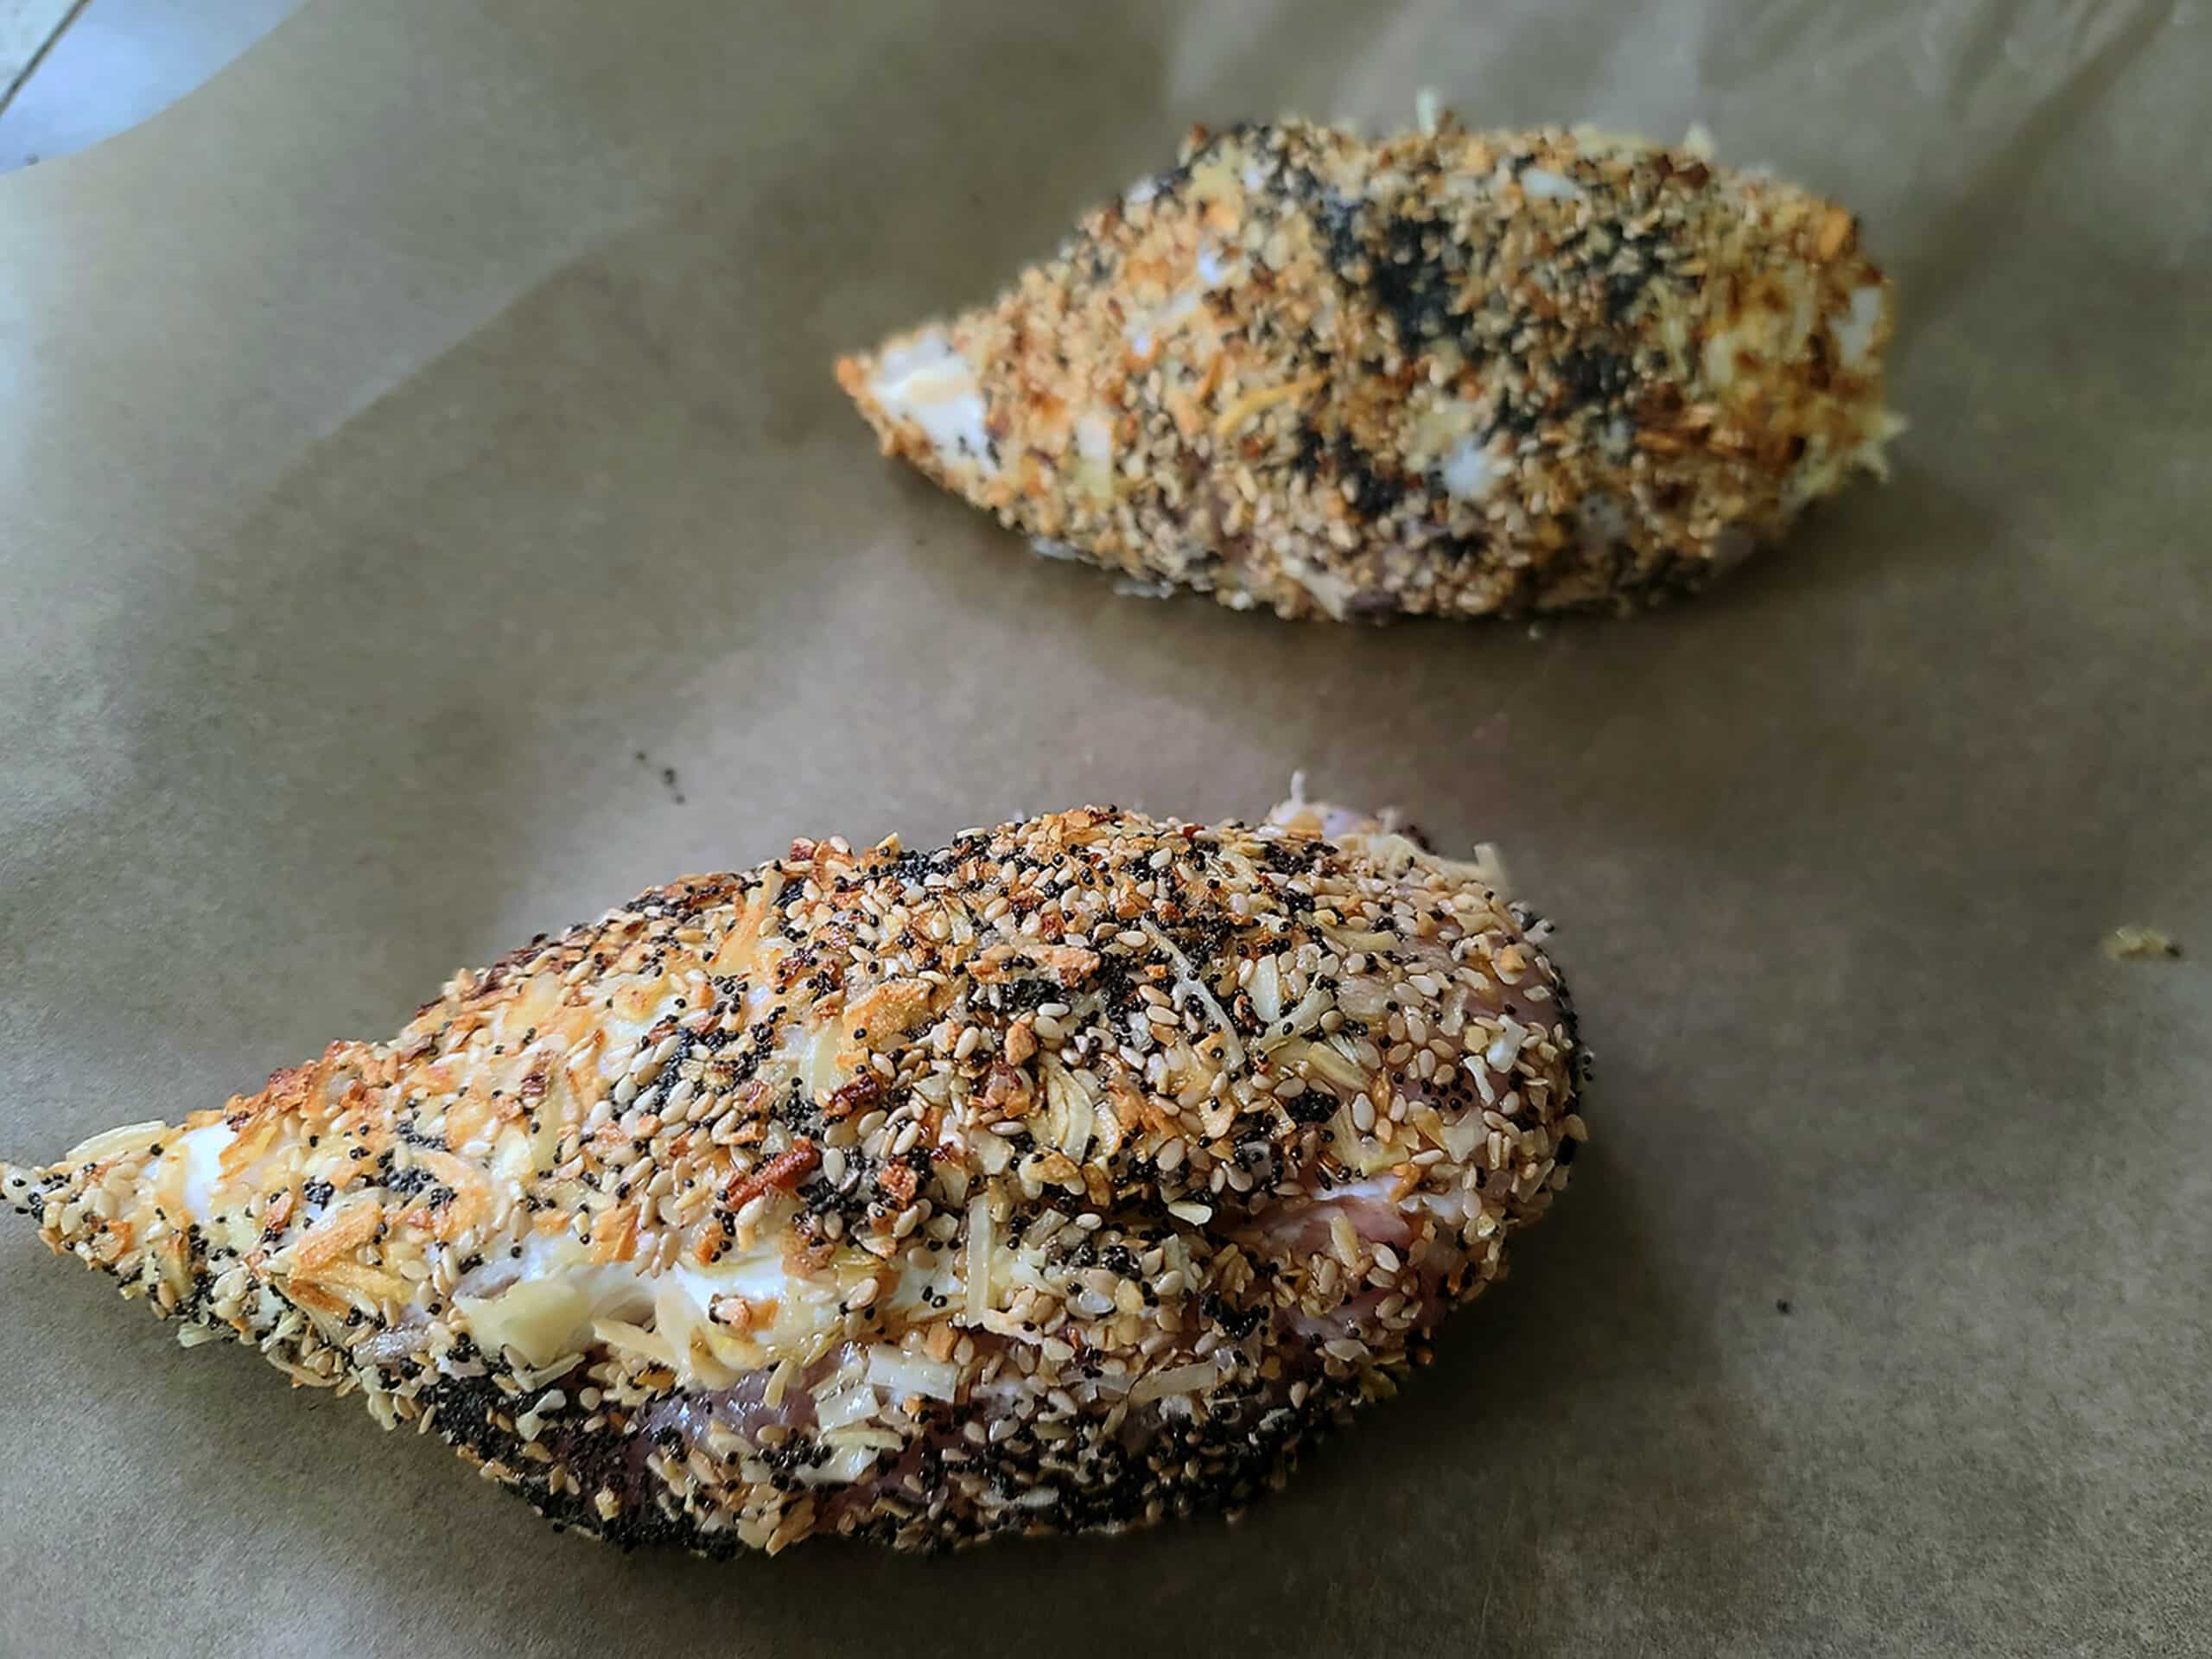 2 baked chicken breasts on a baking sheet, both covered in everything bagel seasoning.